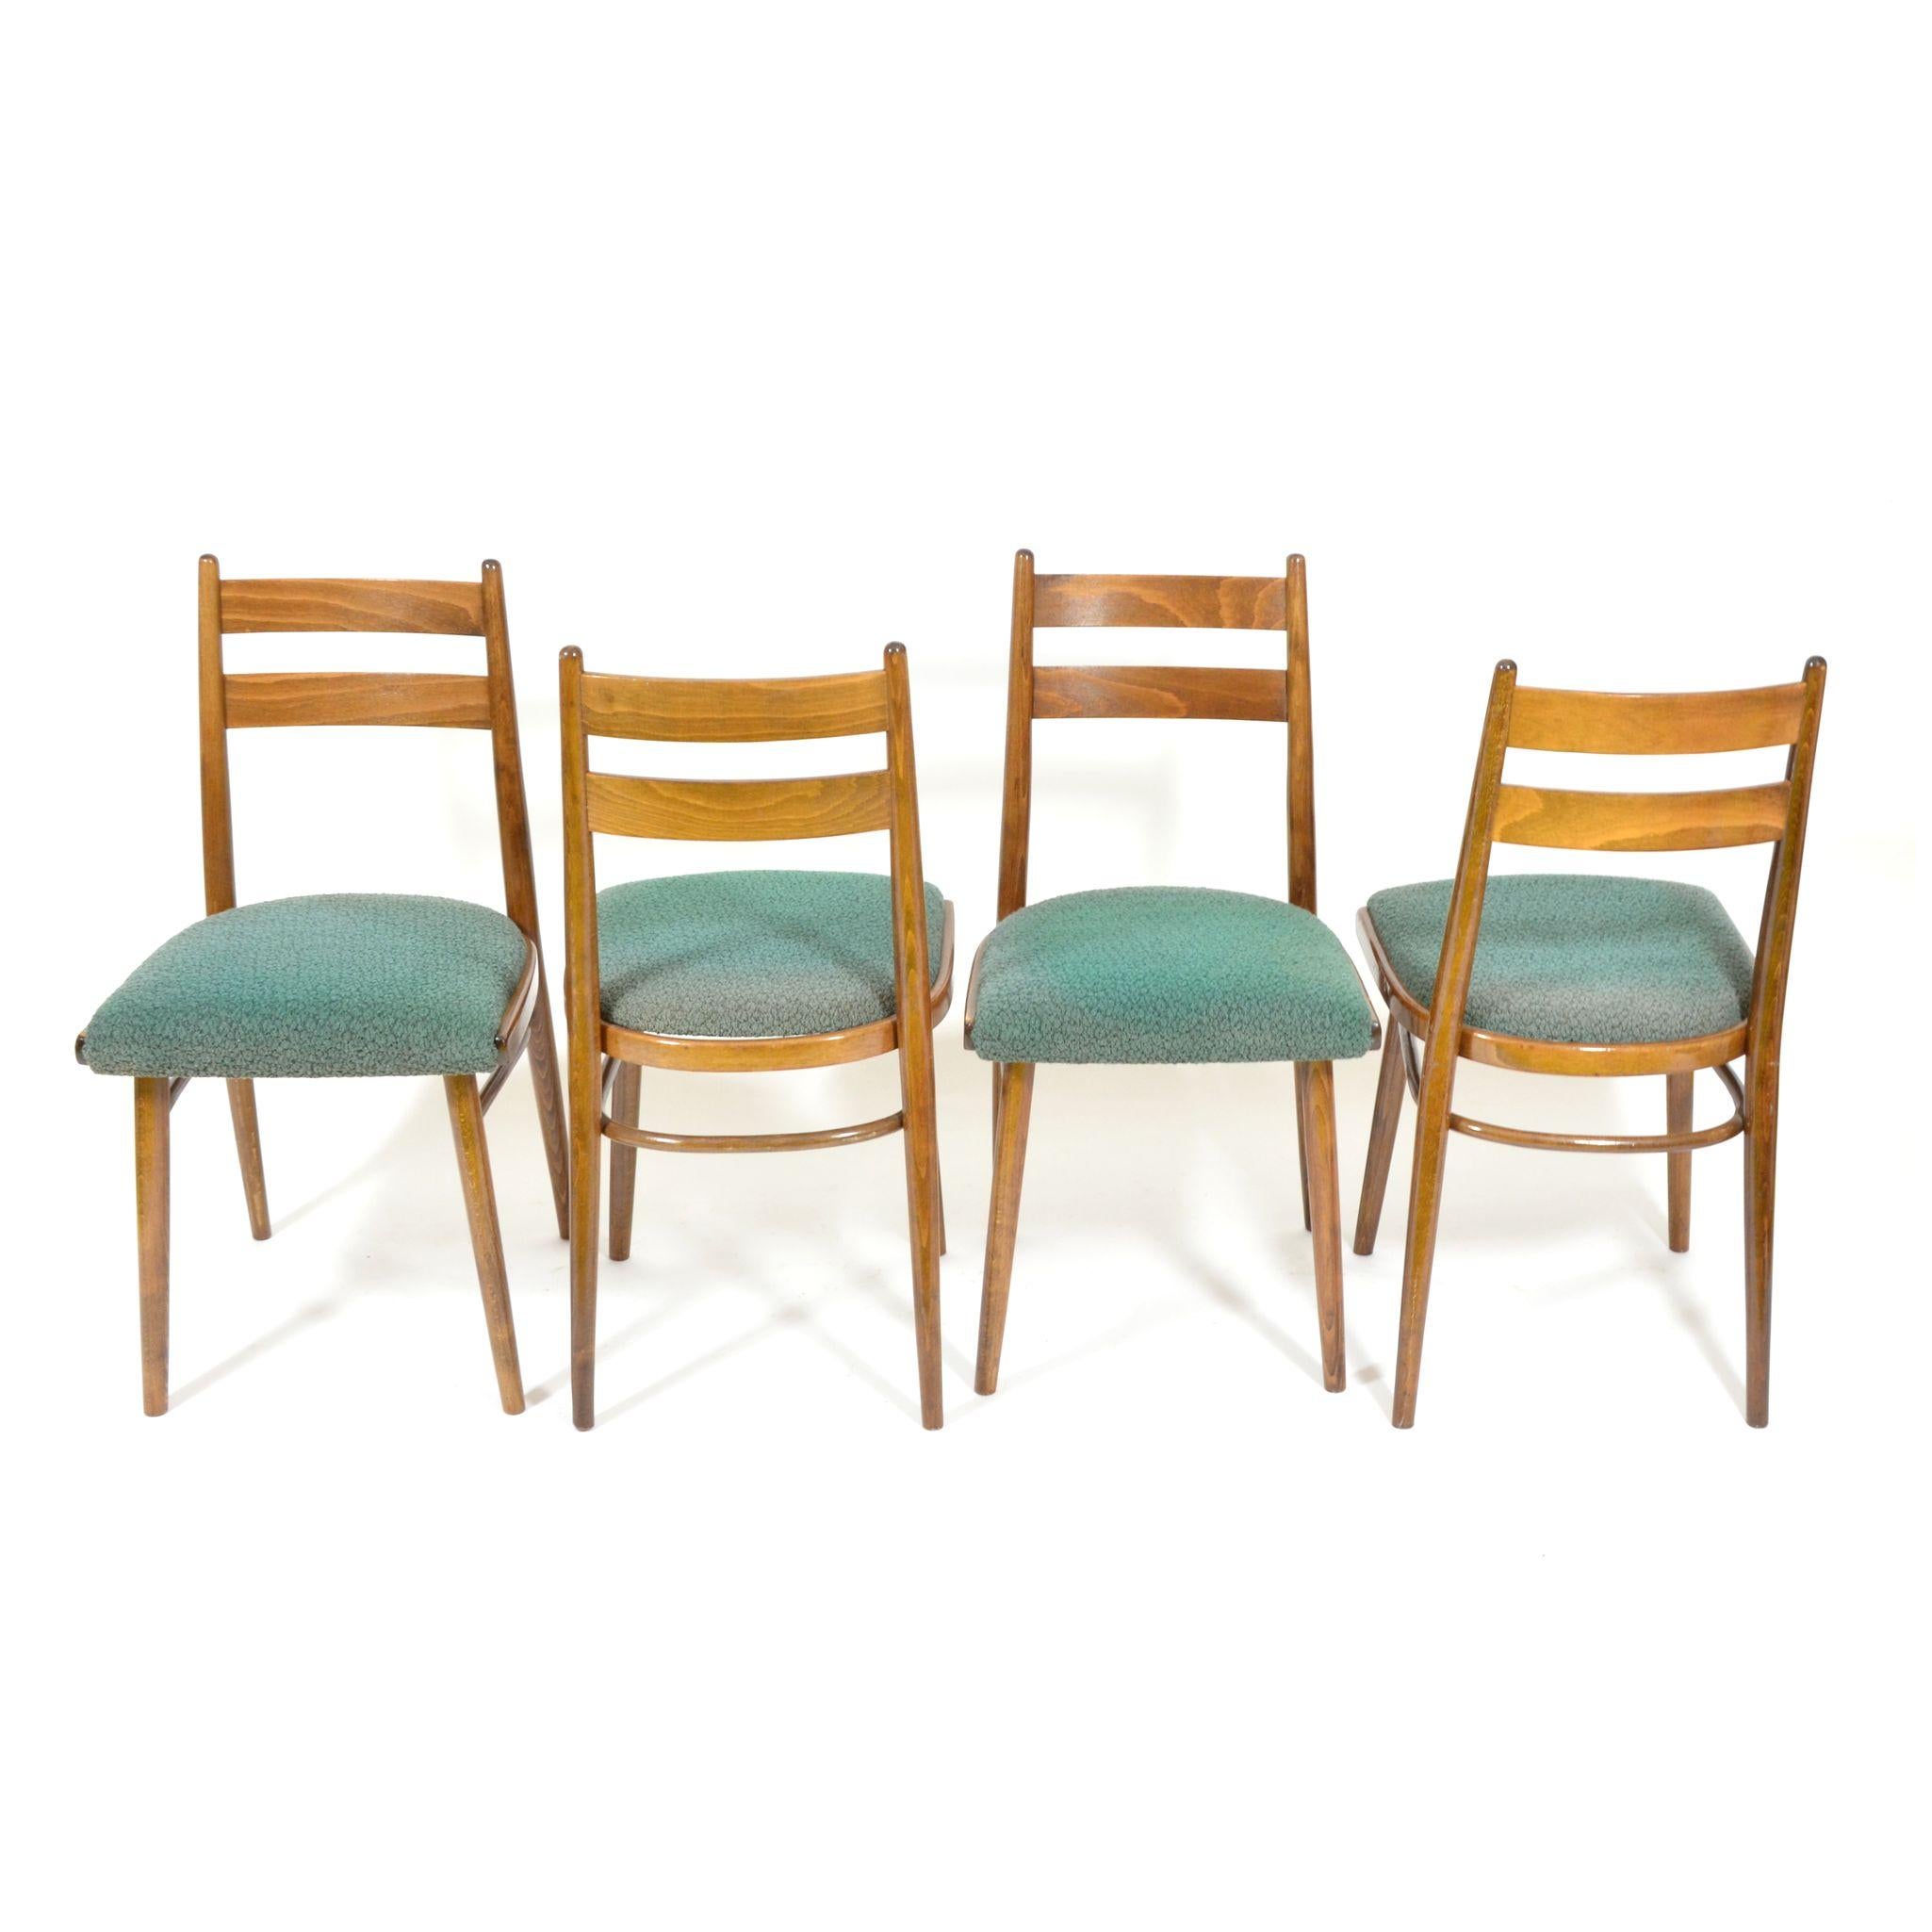 Set of Four Vintage Dining Chairs, Green Seats, Czechoslovakia, 1970s 3